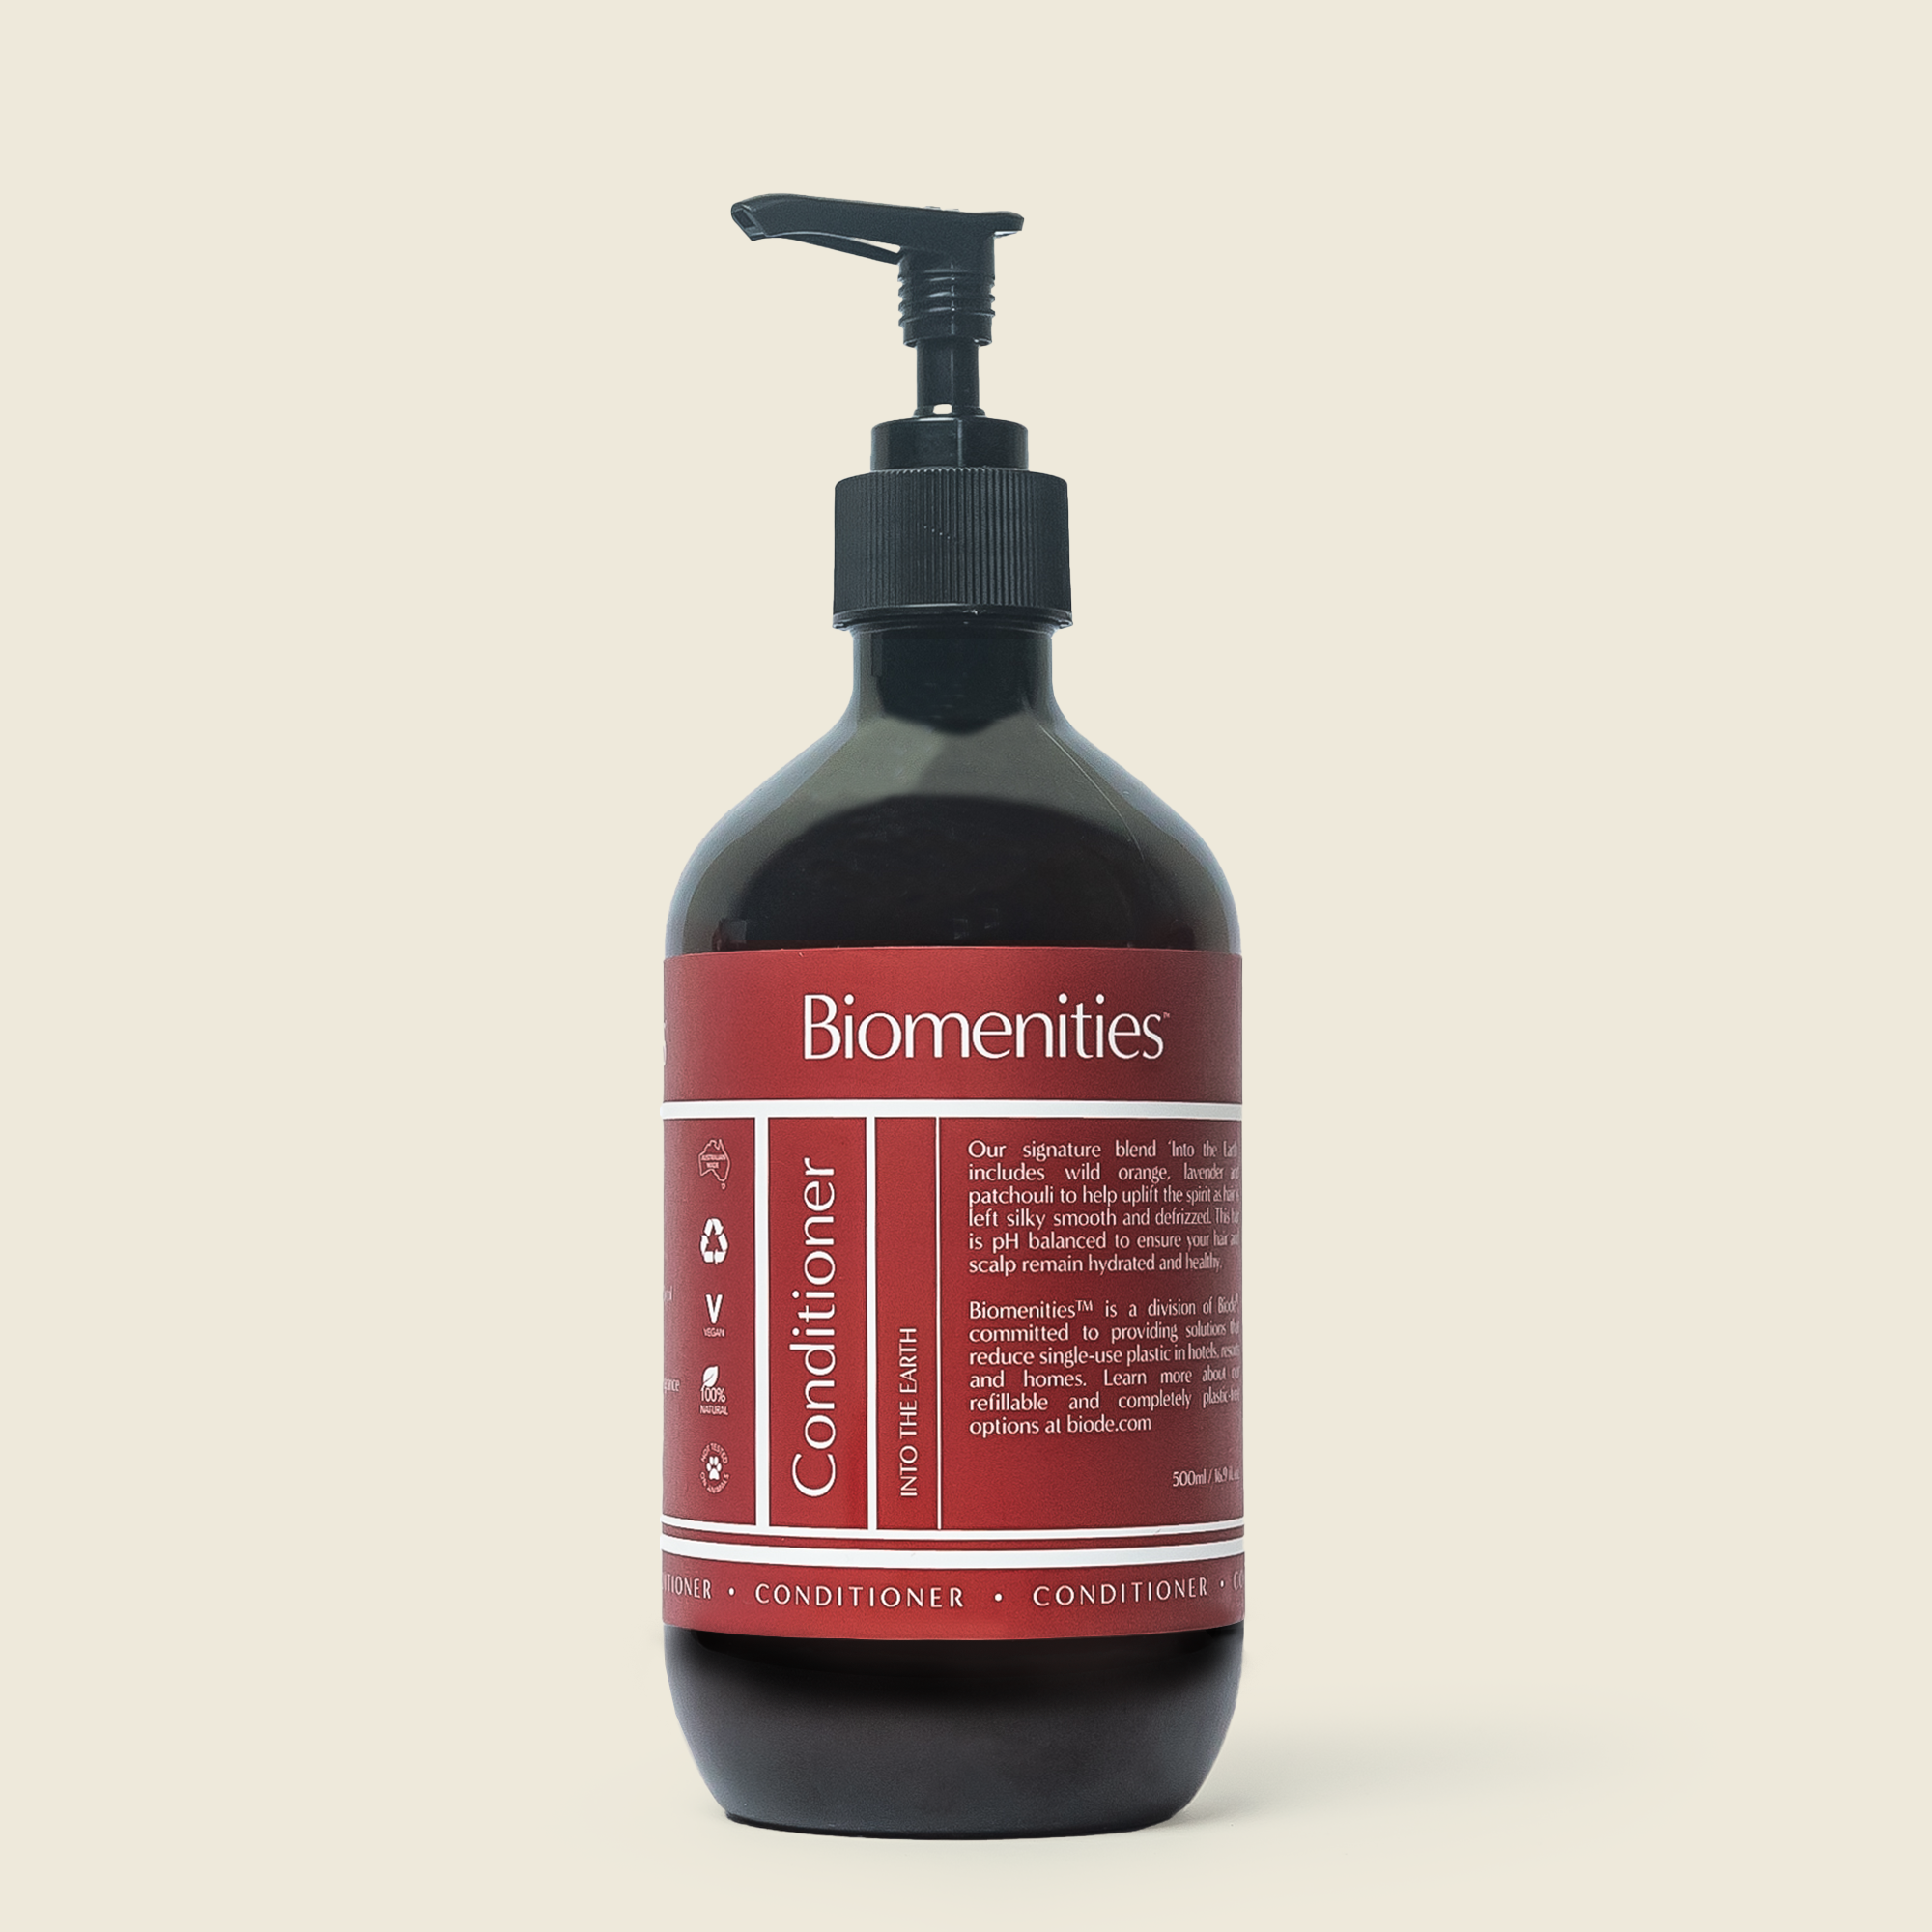 Biomenities "Into the Earth" Conditioner